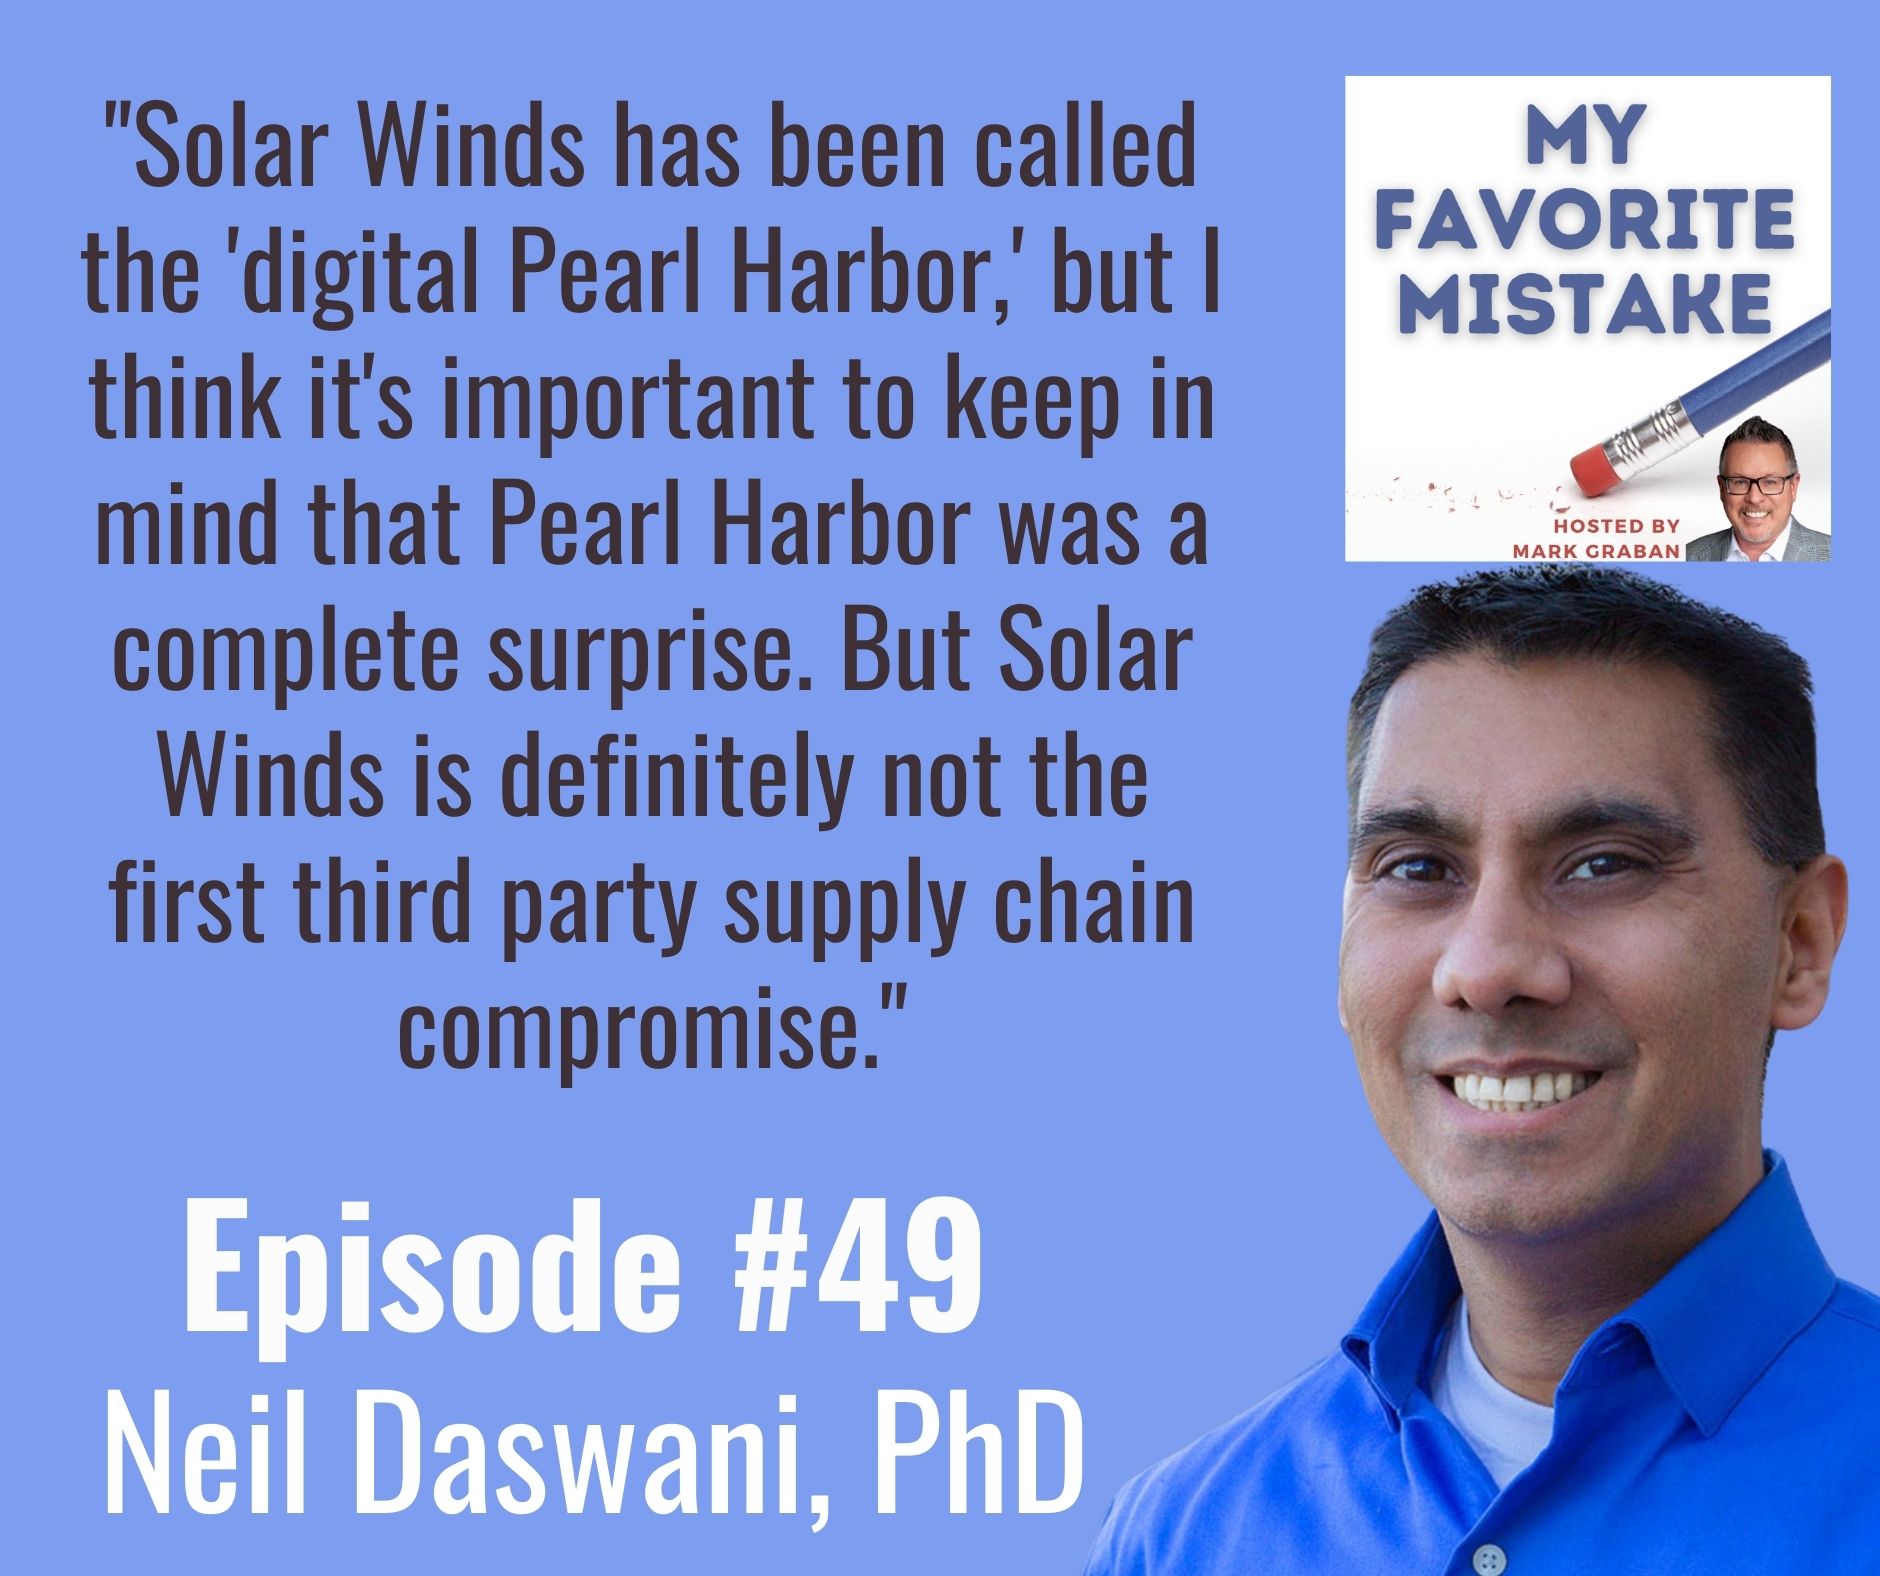 "Solar Winds has been called the 'digital Pearl Harbor,' but I think it's important to keep in mind that Pearl Harbor was a complete surprise. But Solar Winds is definitely not the first third party supply chain compromise."